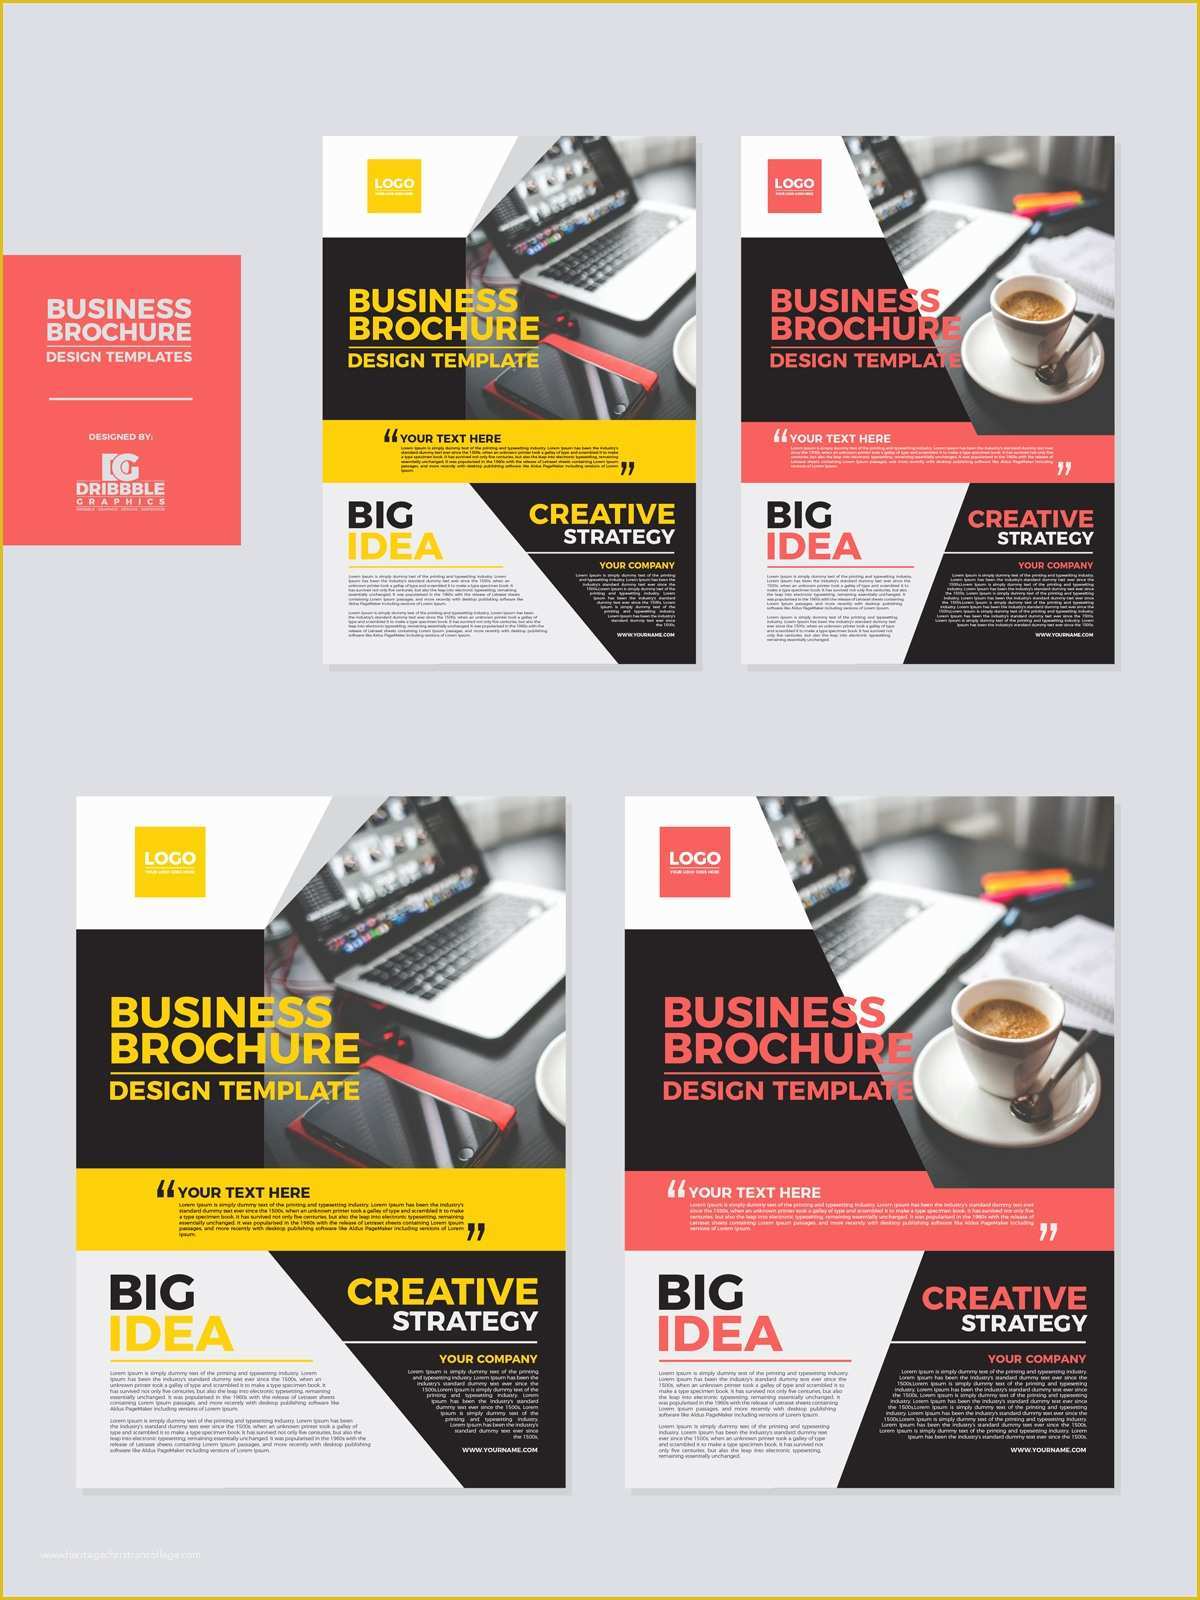 Free Booklet Design Templates Of Free Business Brochure Design Templates